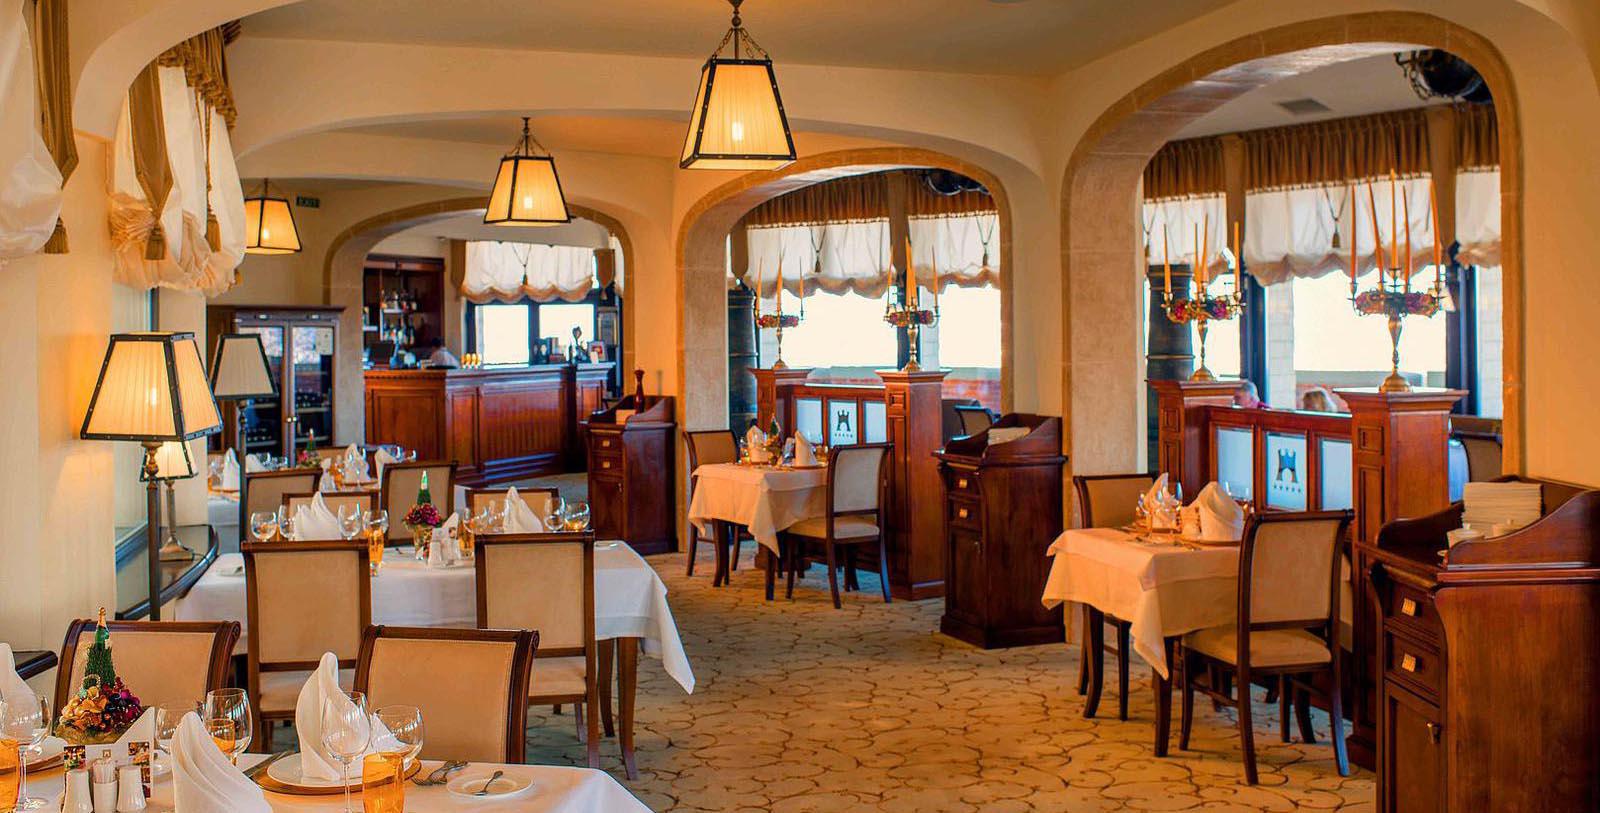 Taste a signature cocktail in the historic Lobby Lounge of the Citadel Inn Hotel & Resort.